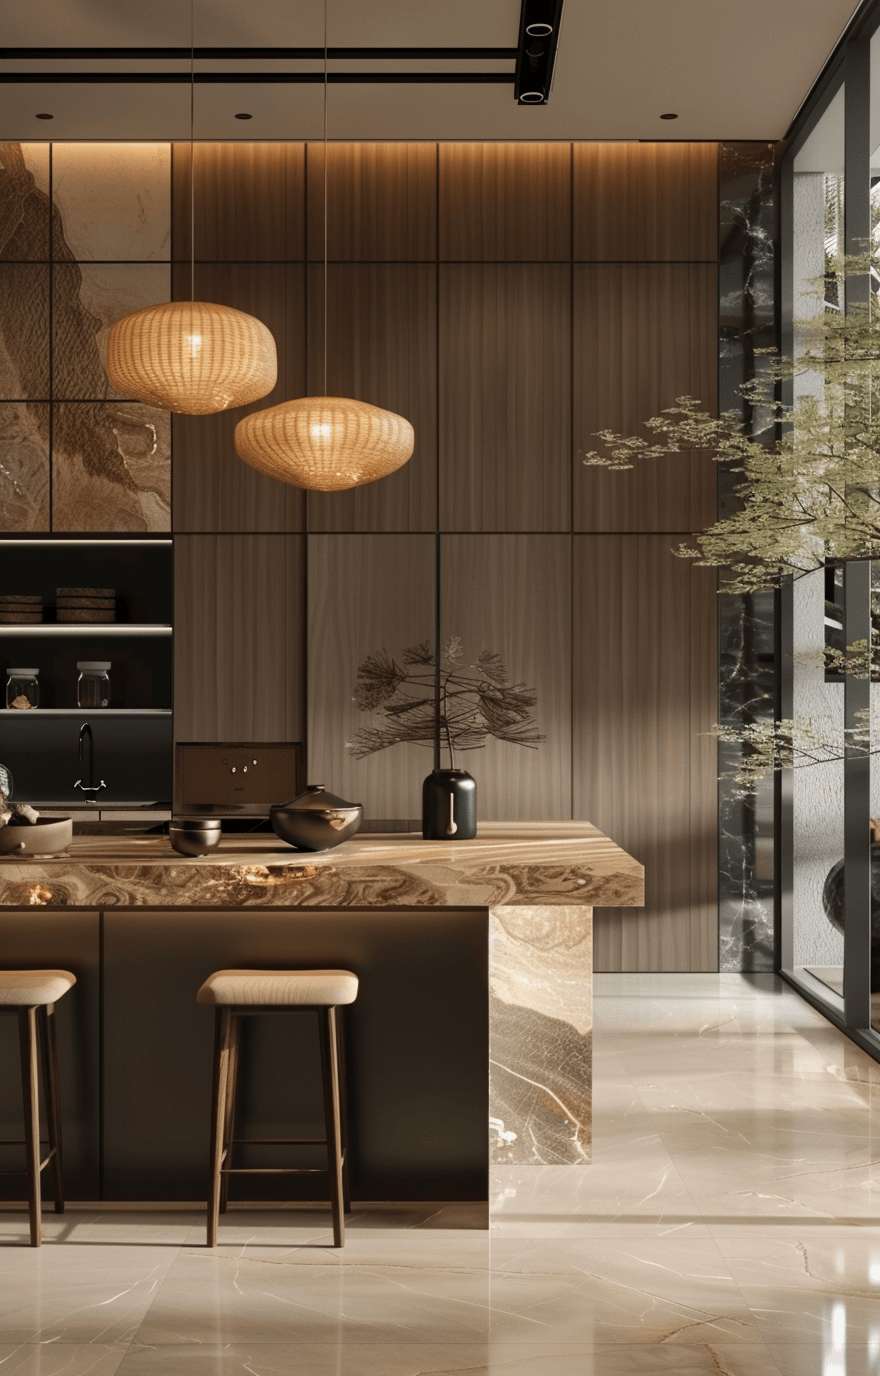 Serene Japandi kitchen decor with soft, muted color palettes